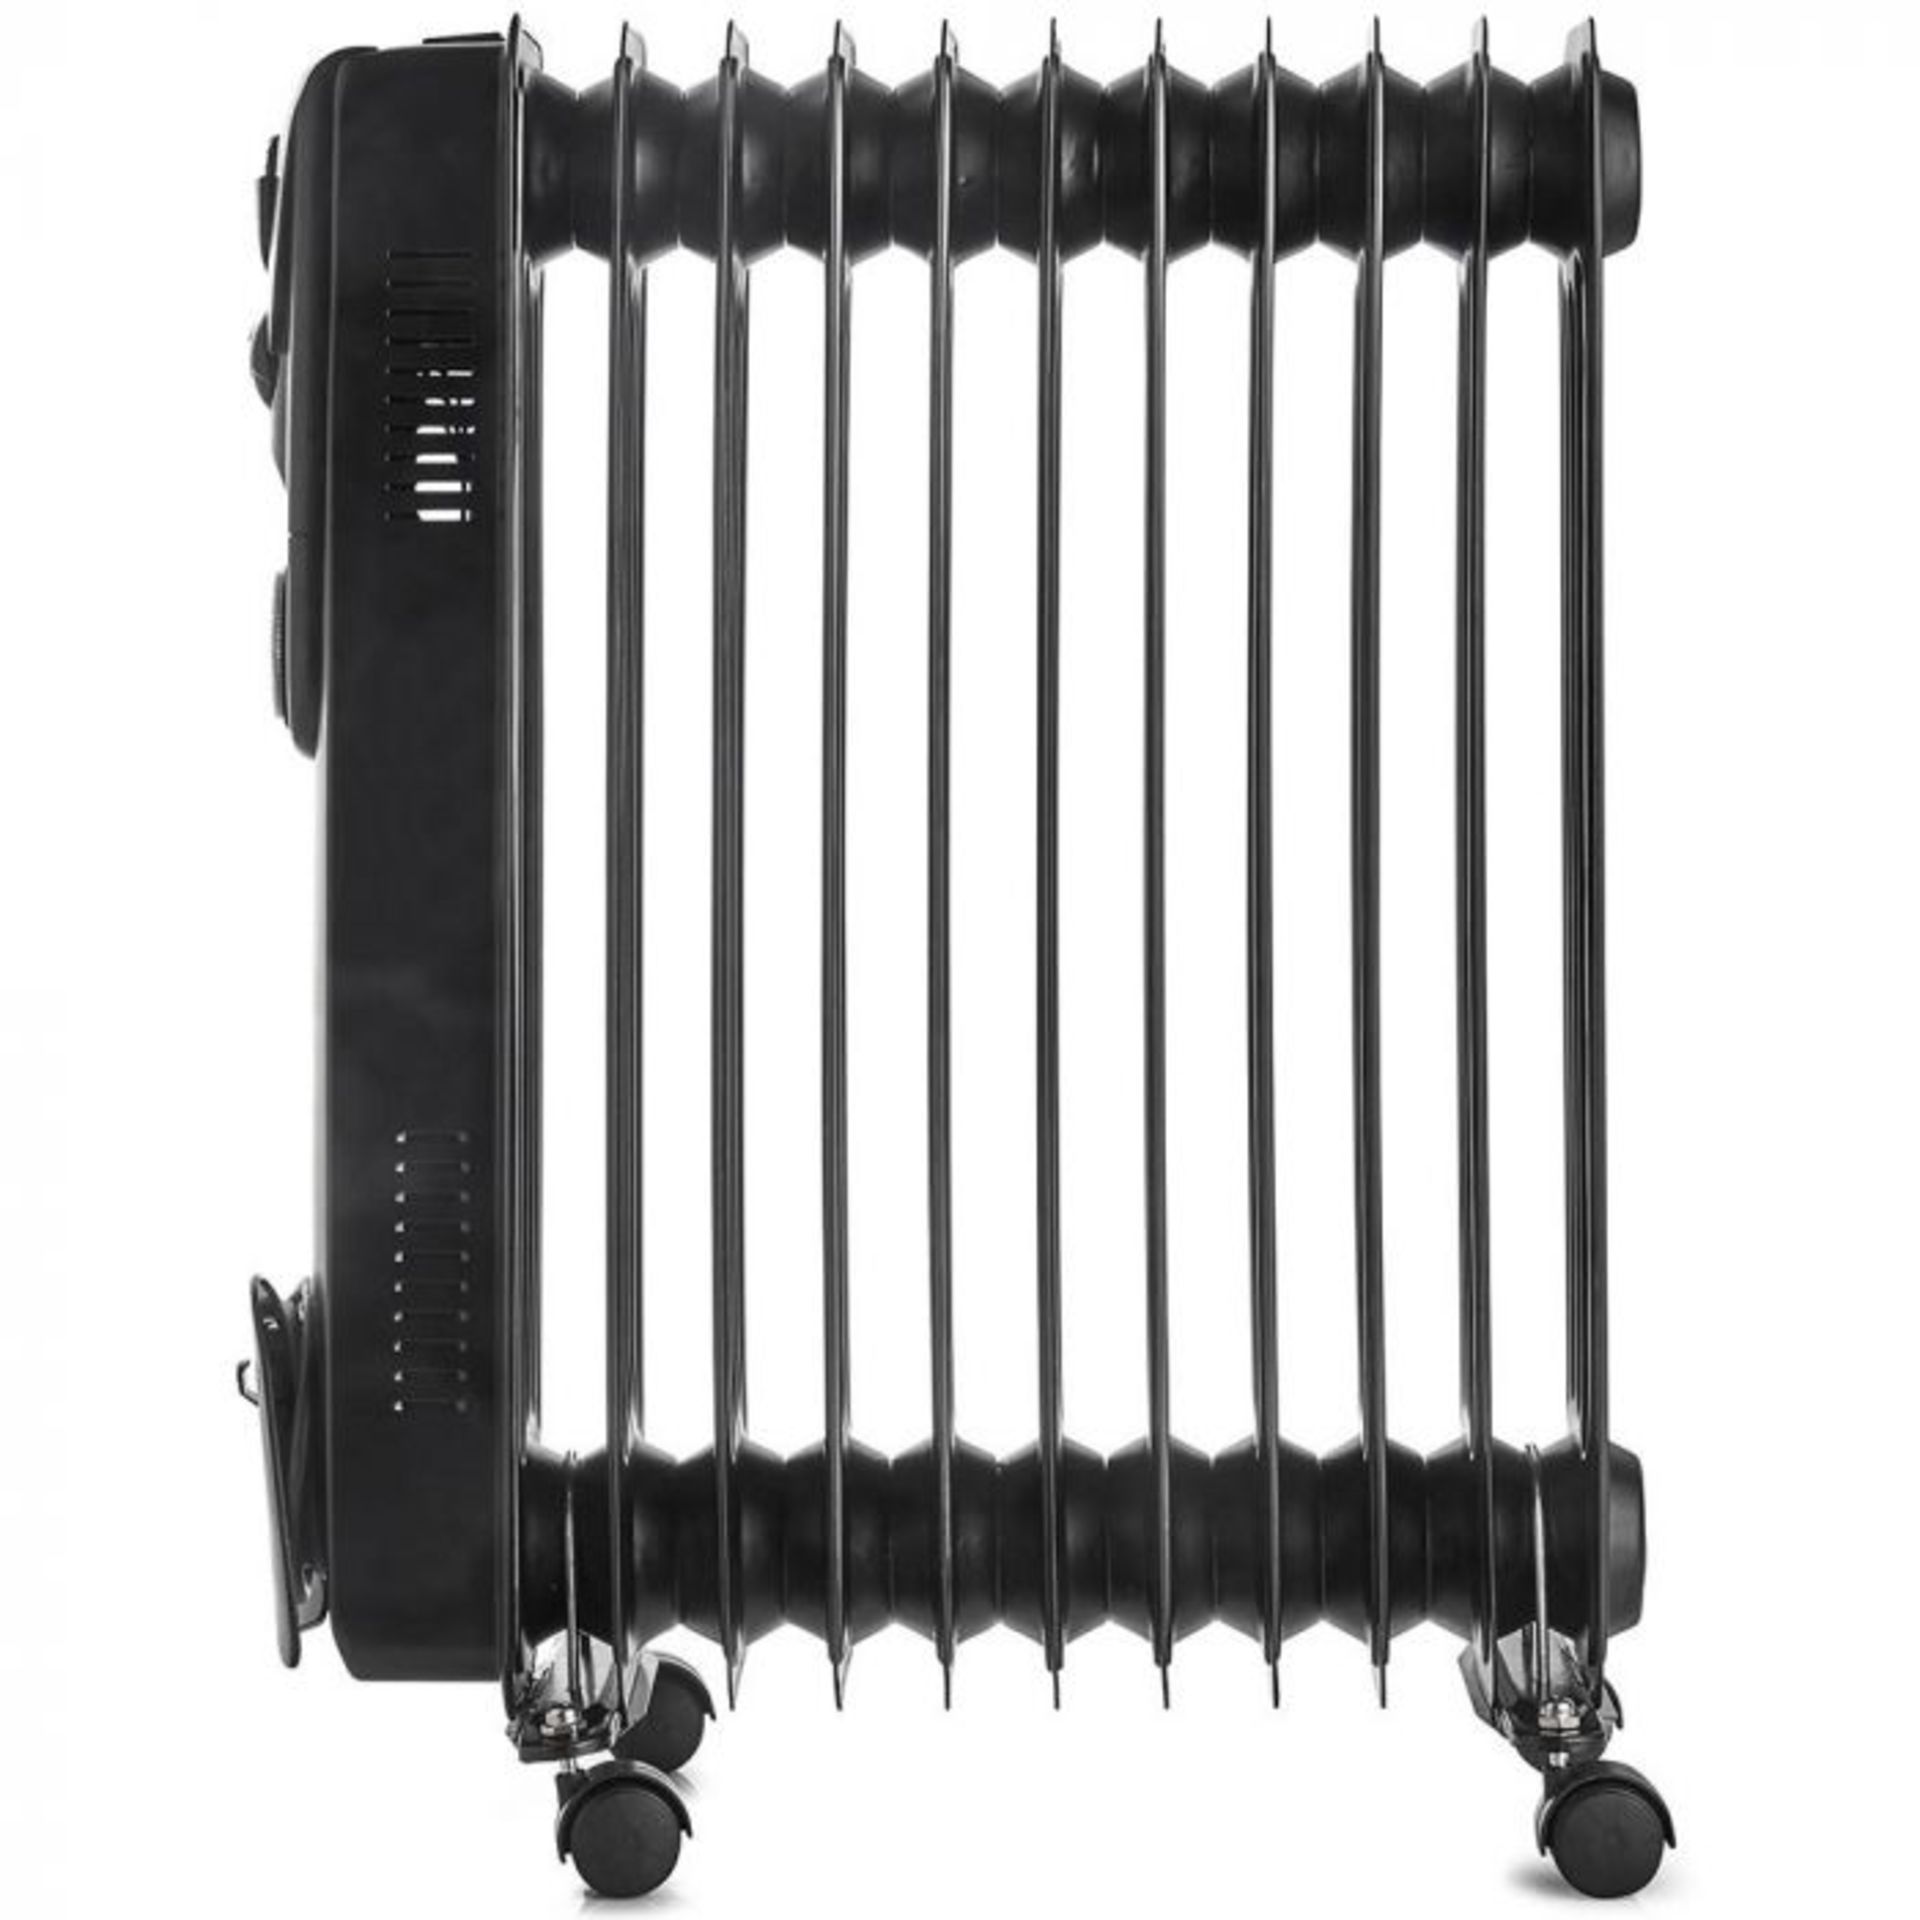 (S80) 11 Fin 2500W Oil Filled Radiator - Black 2500W radiator with 11 oil-filled fins for heat...